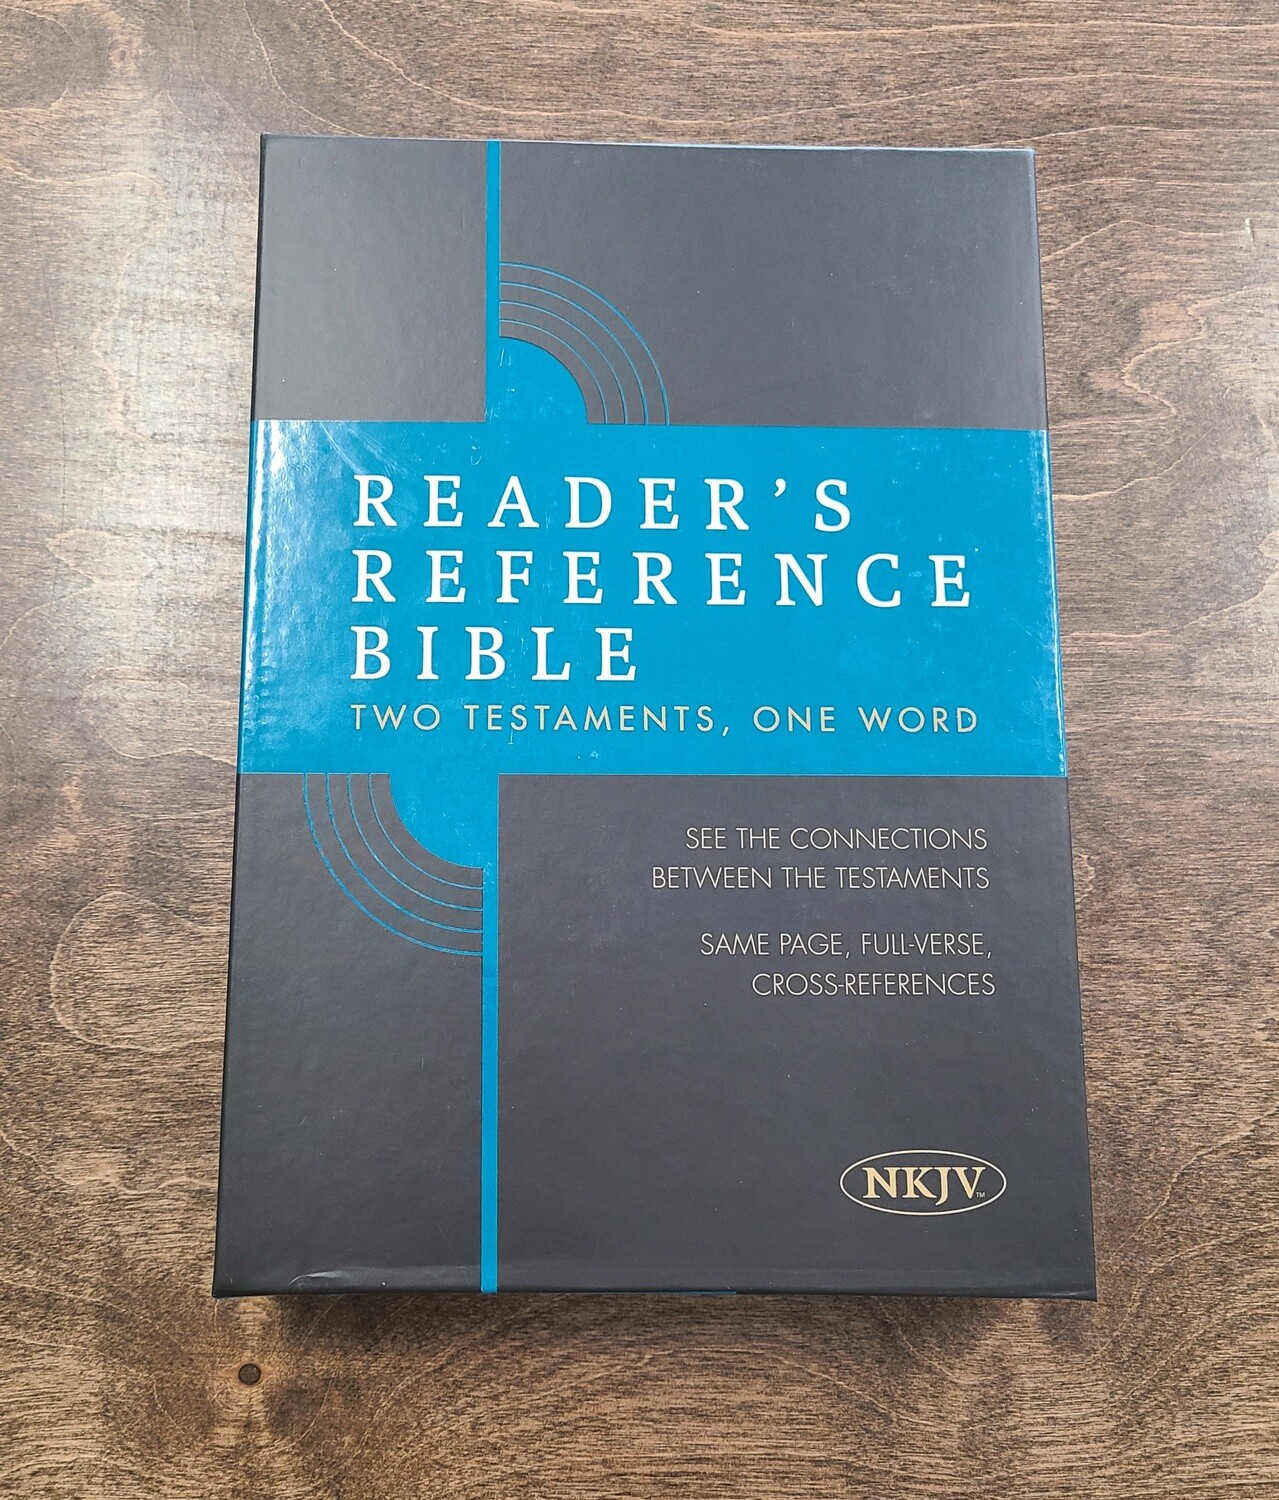 NKJV Reader's Reference Bible - Dark Gray and Light Gray Leather